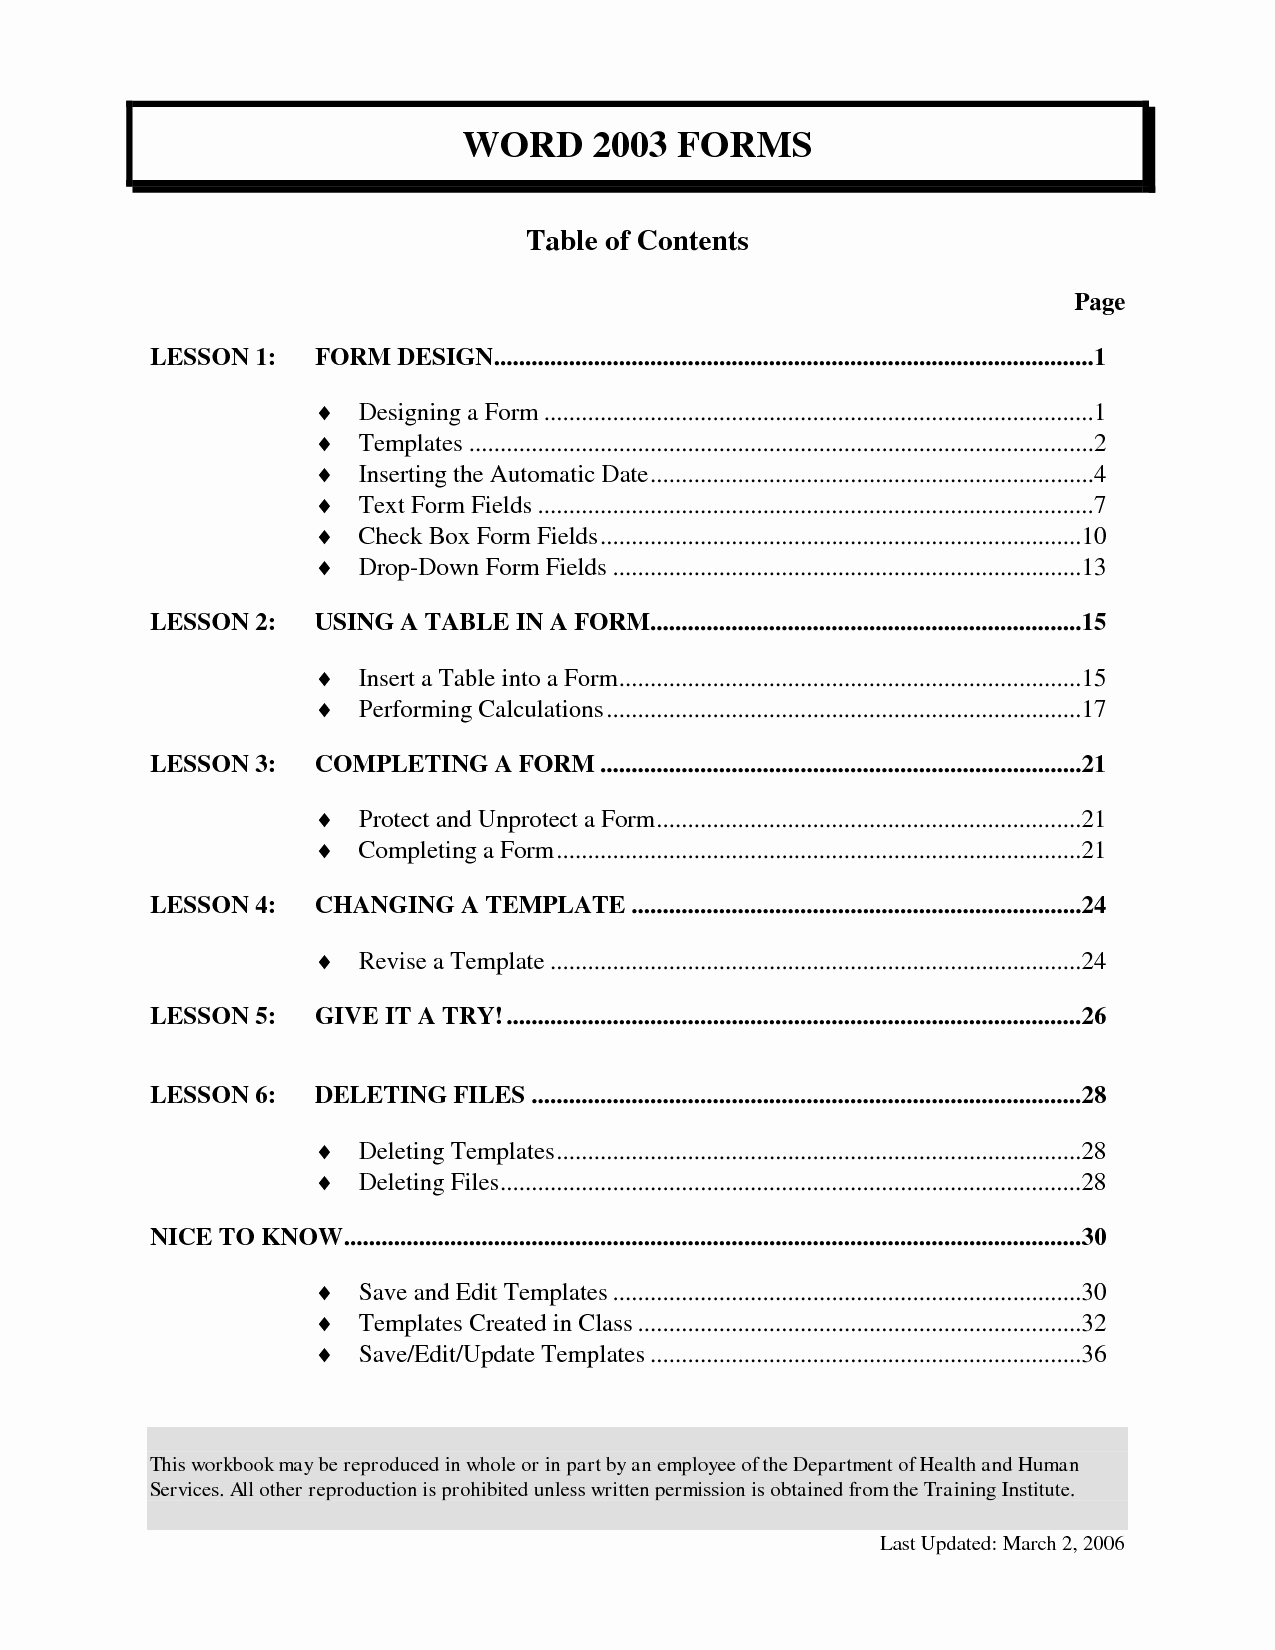 Table Of Contents Template Pdf Luxury Table Contents Template Word